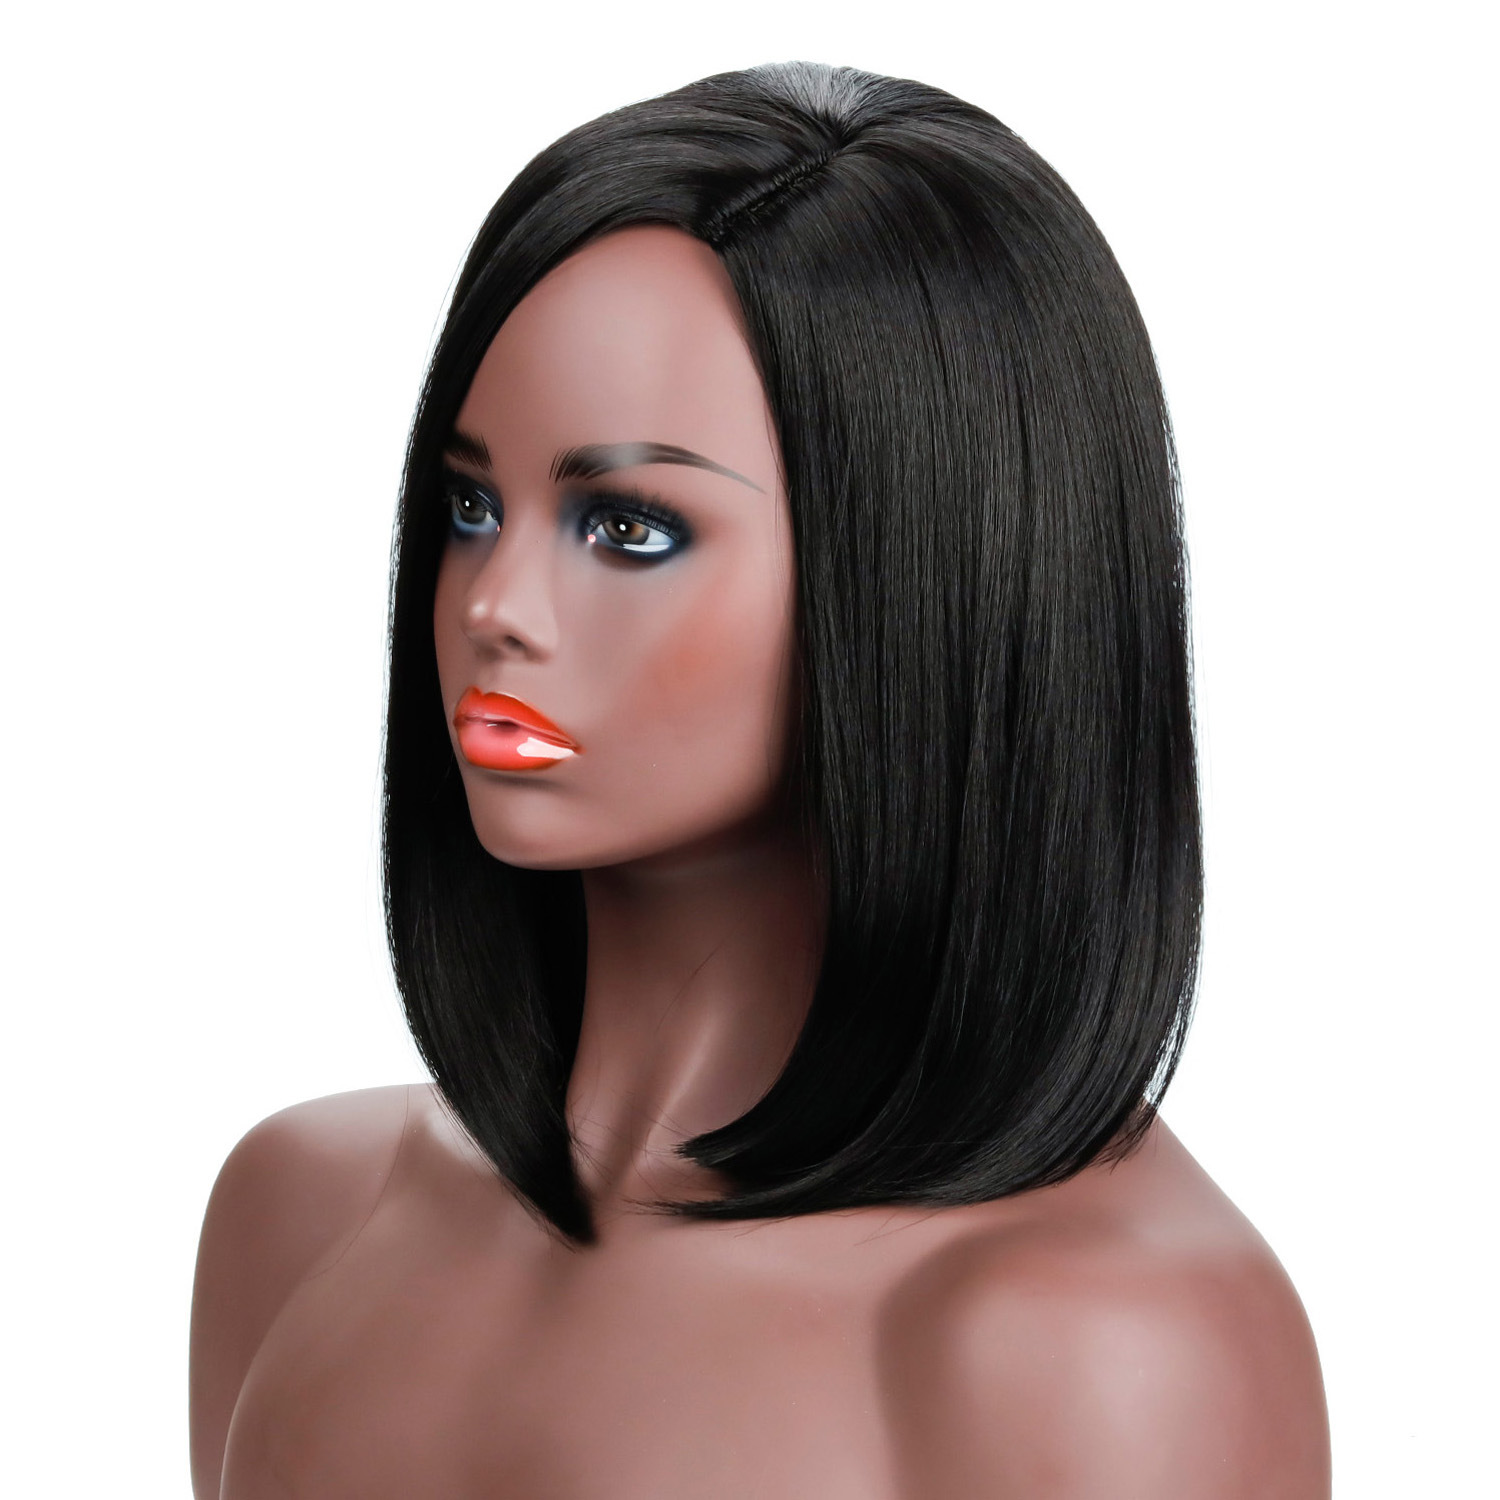 Image of a synthetic wig featuring women's fashion black straight hair of medium length, ideal for a trendy style